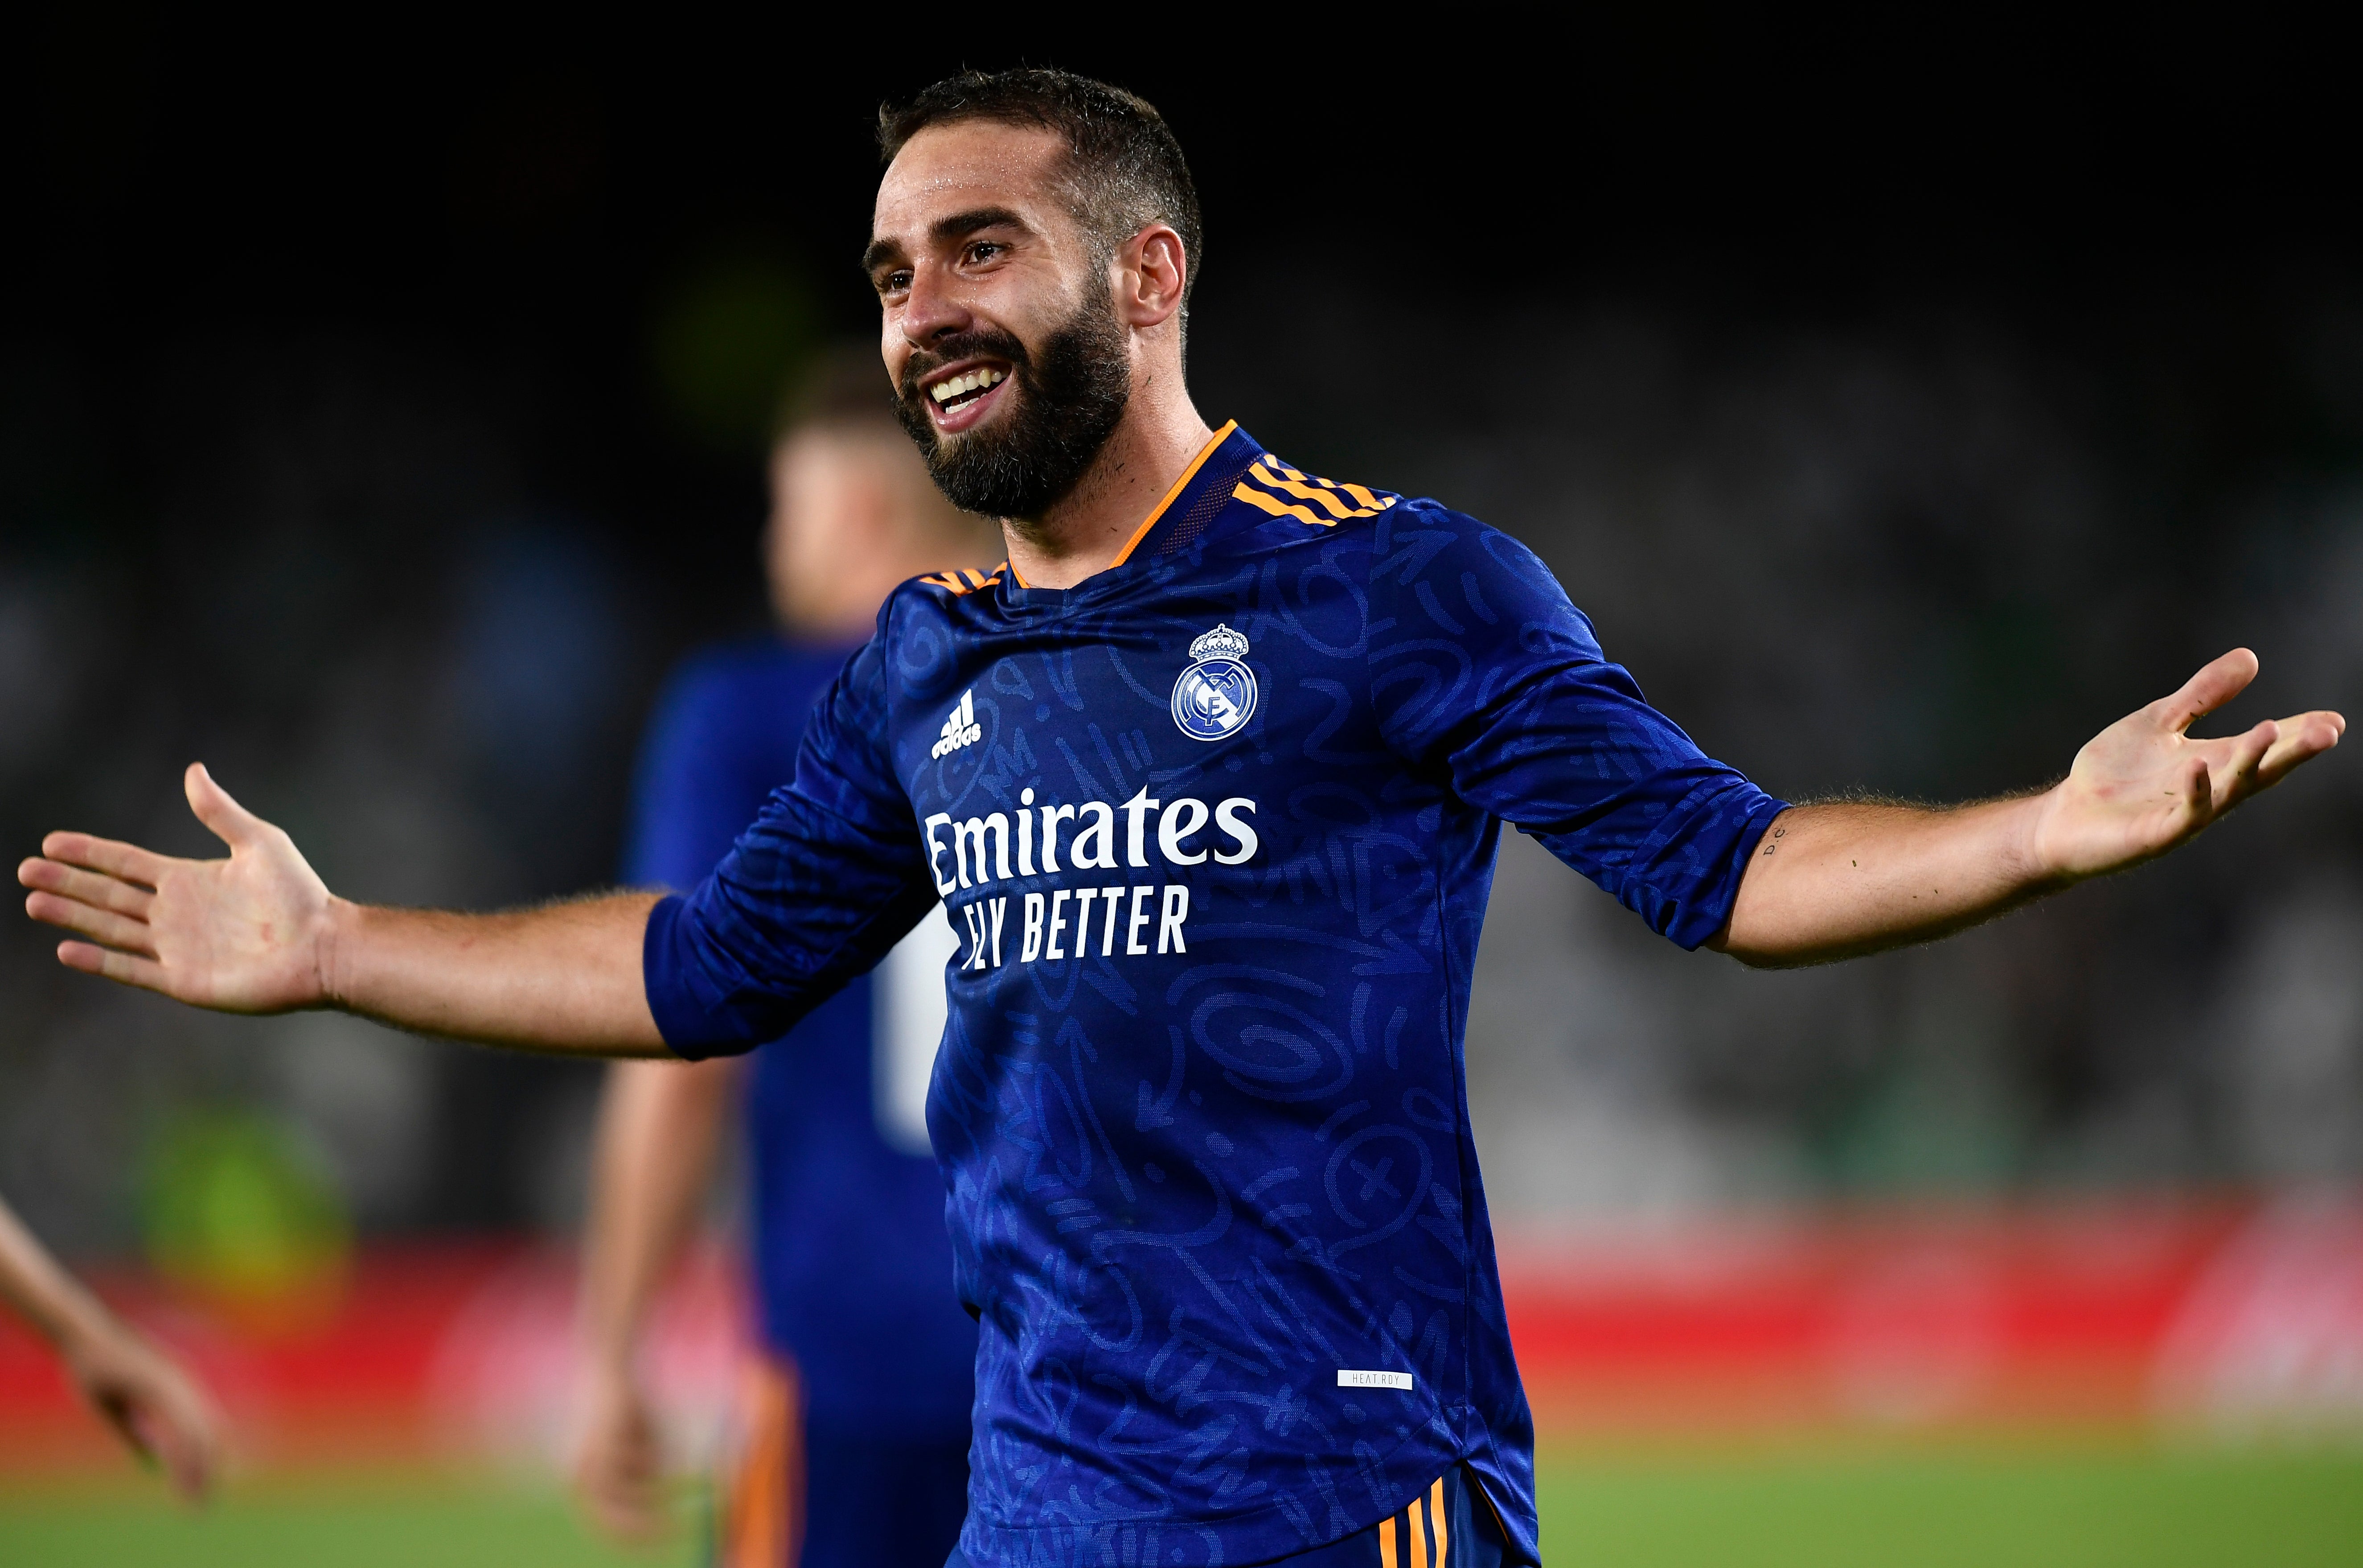  Dani Carvajal of Real Madrid celebrates after scoring a goal during a Champions League match.